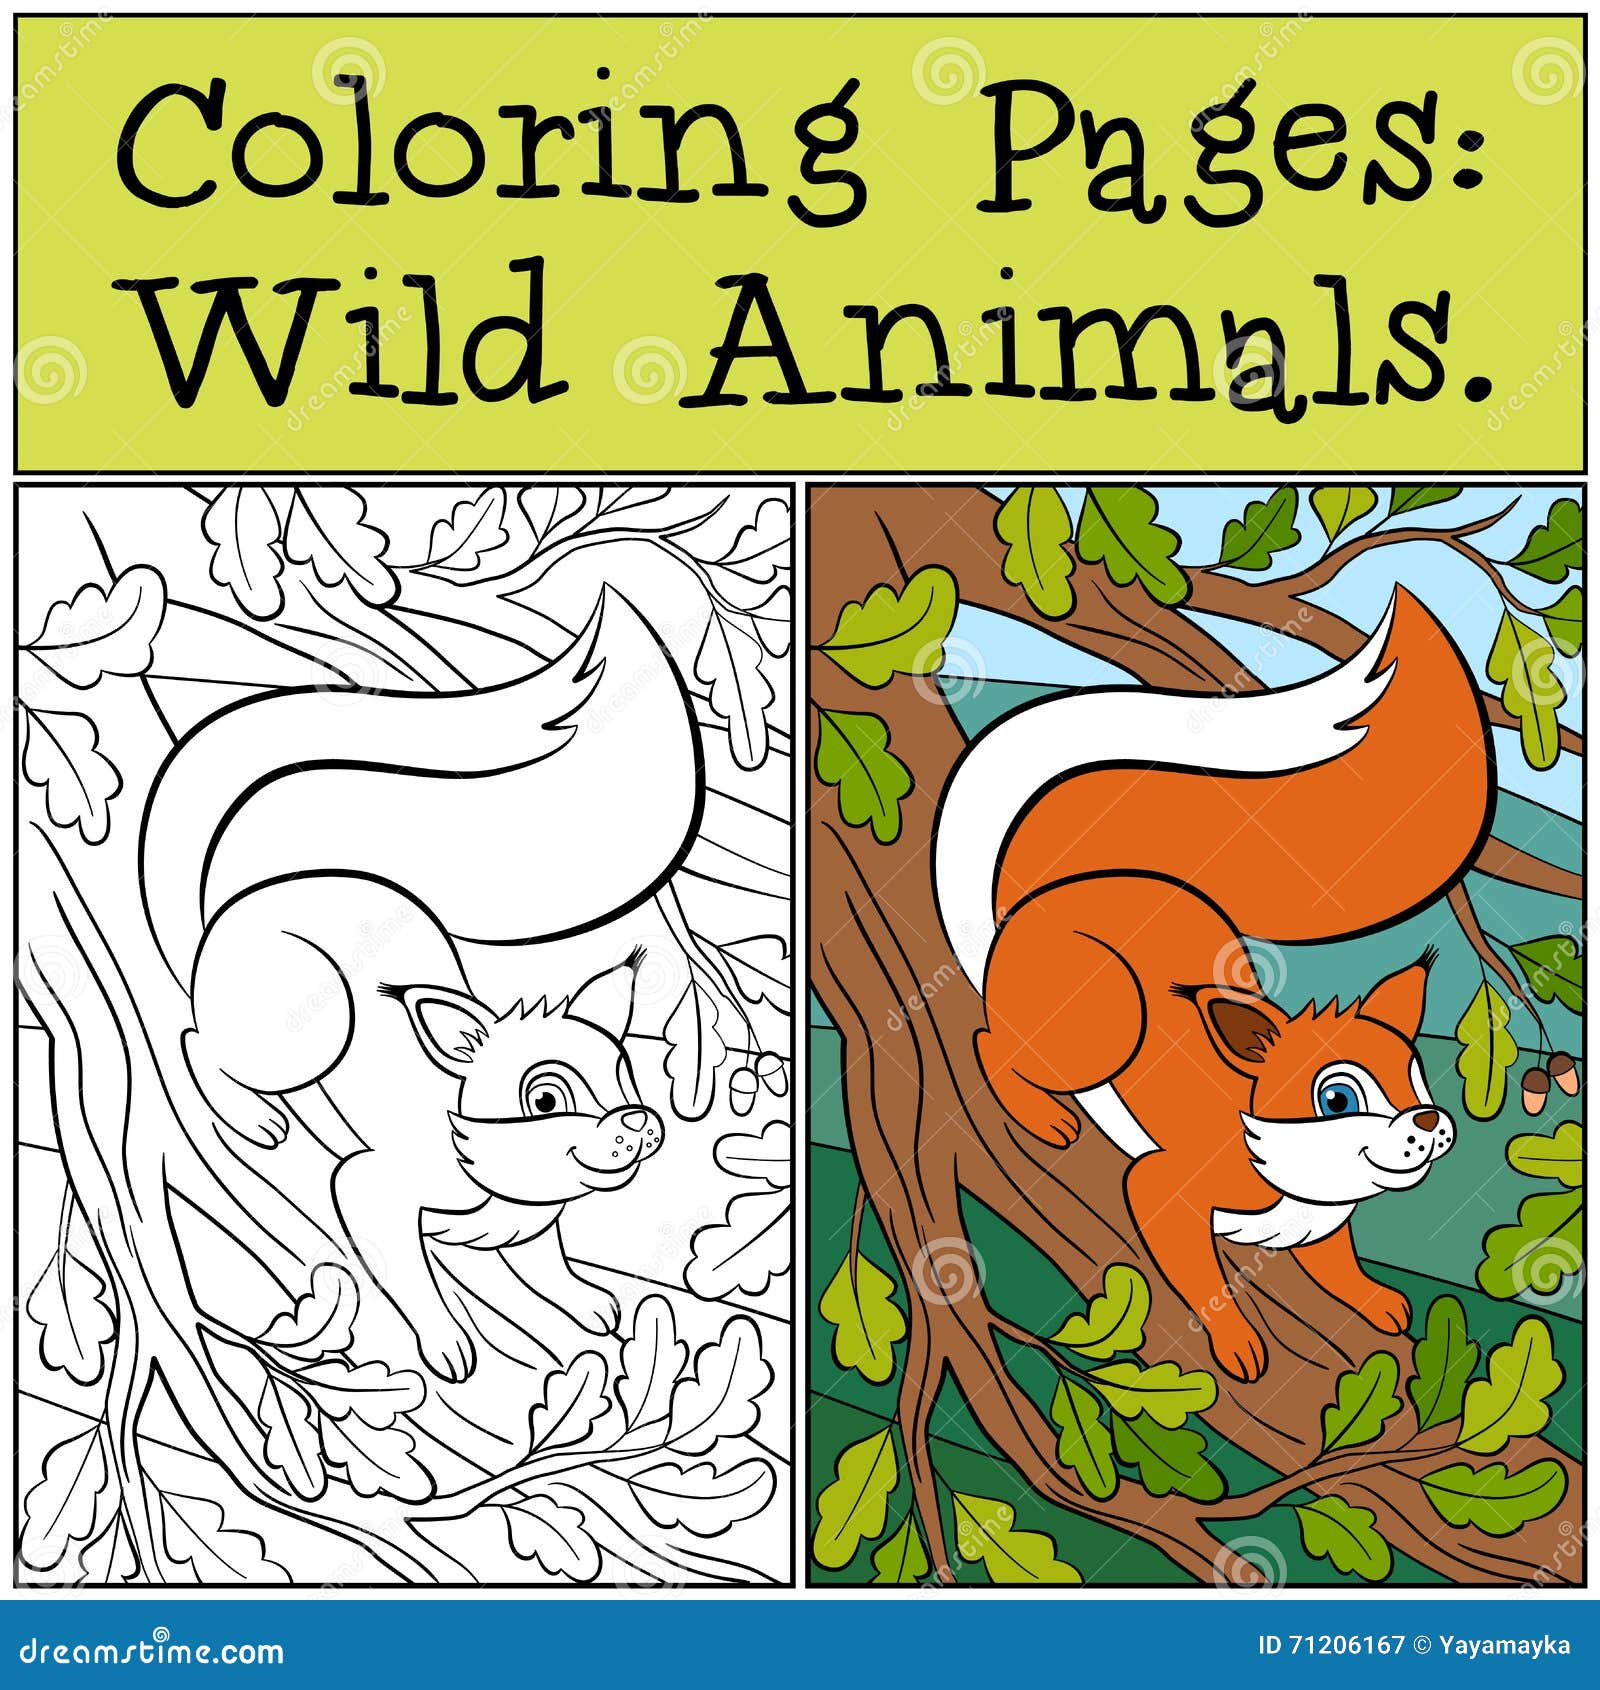 coloring pages: wild animals. little cute squirrel .